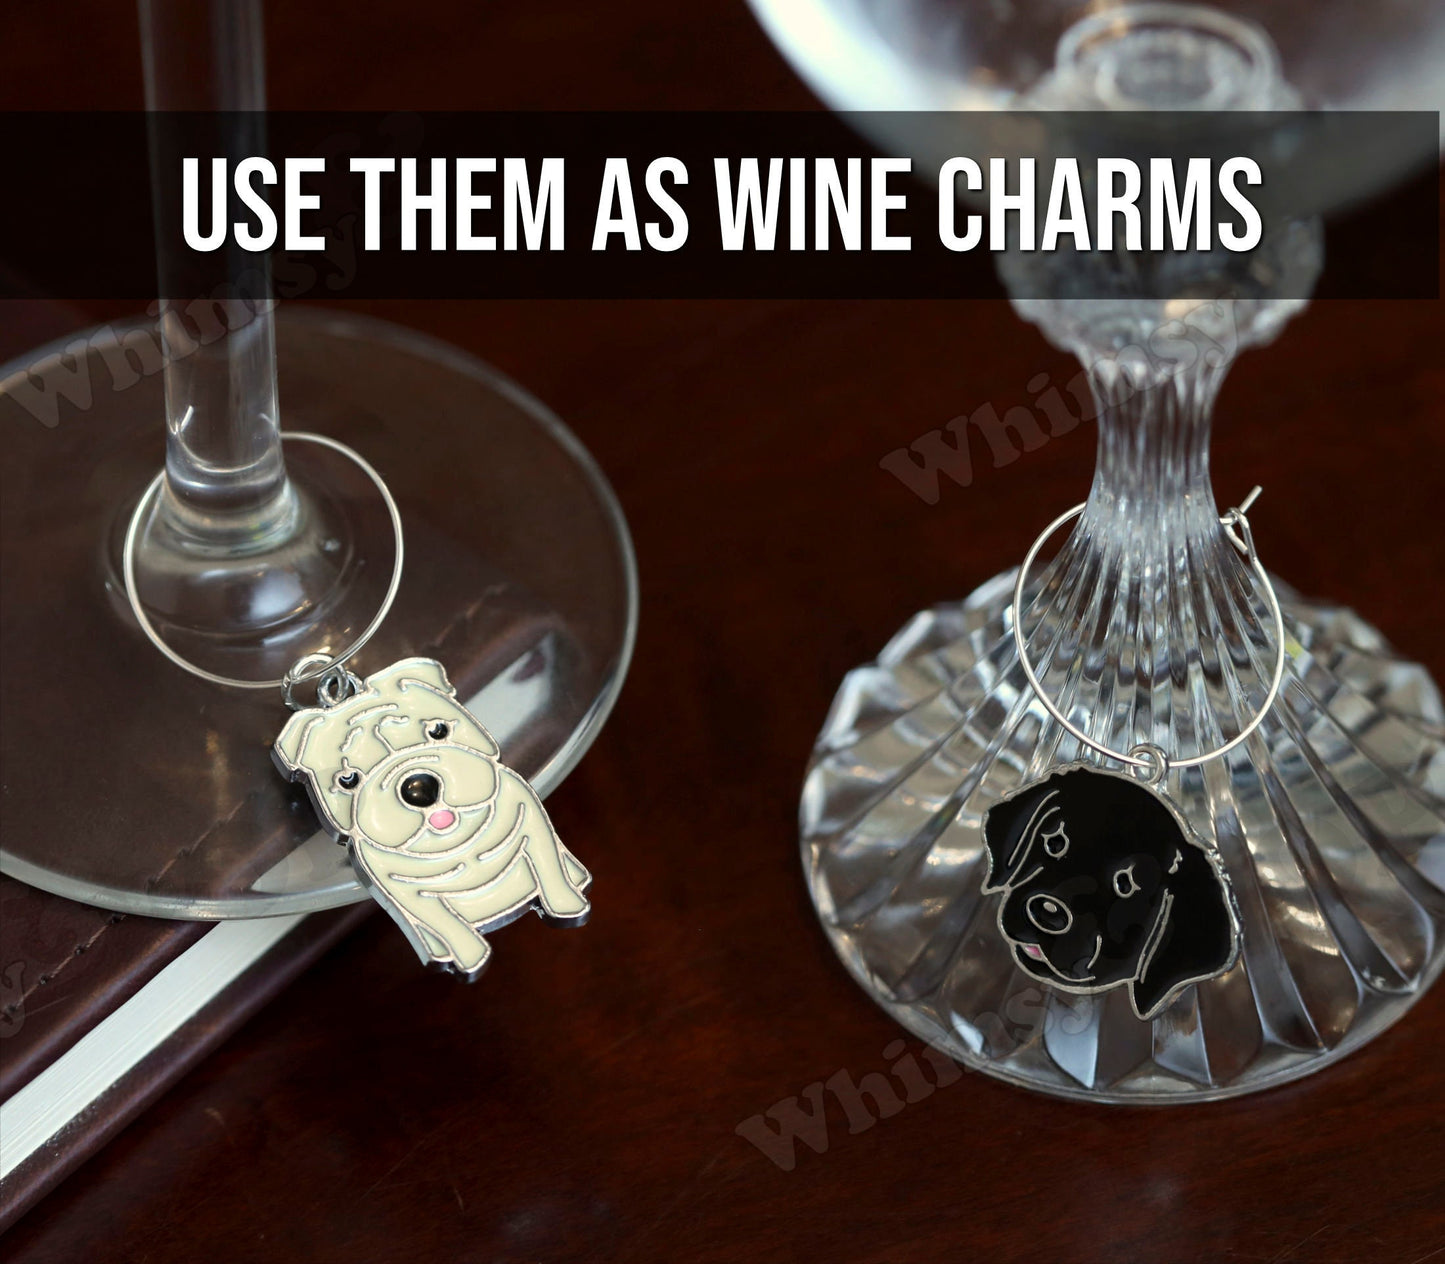 WhimsyandPOP dog charms used on wine glasses